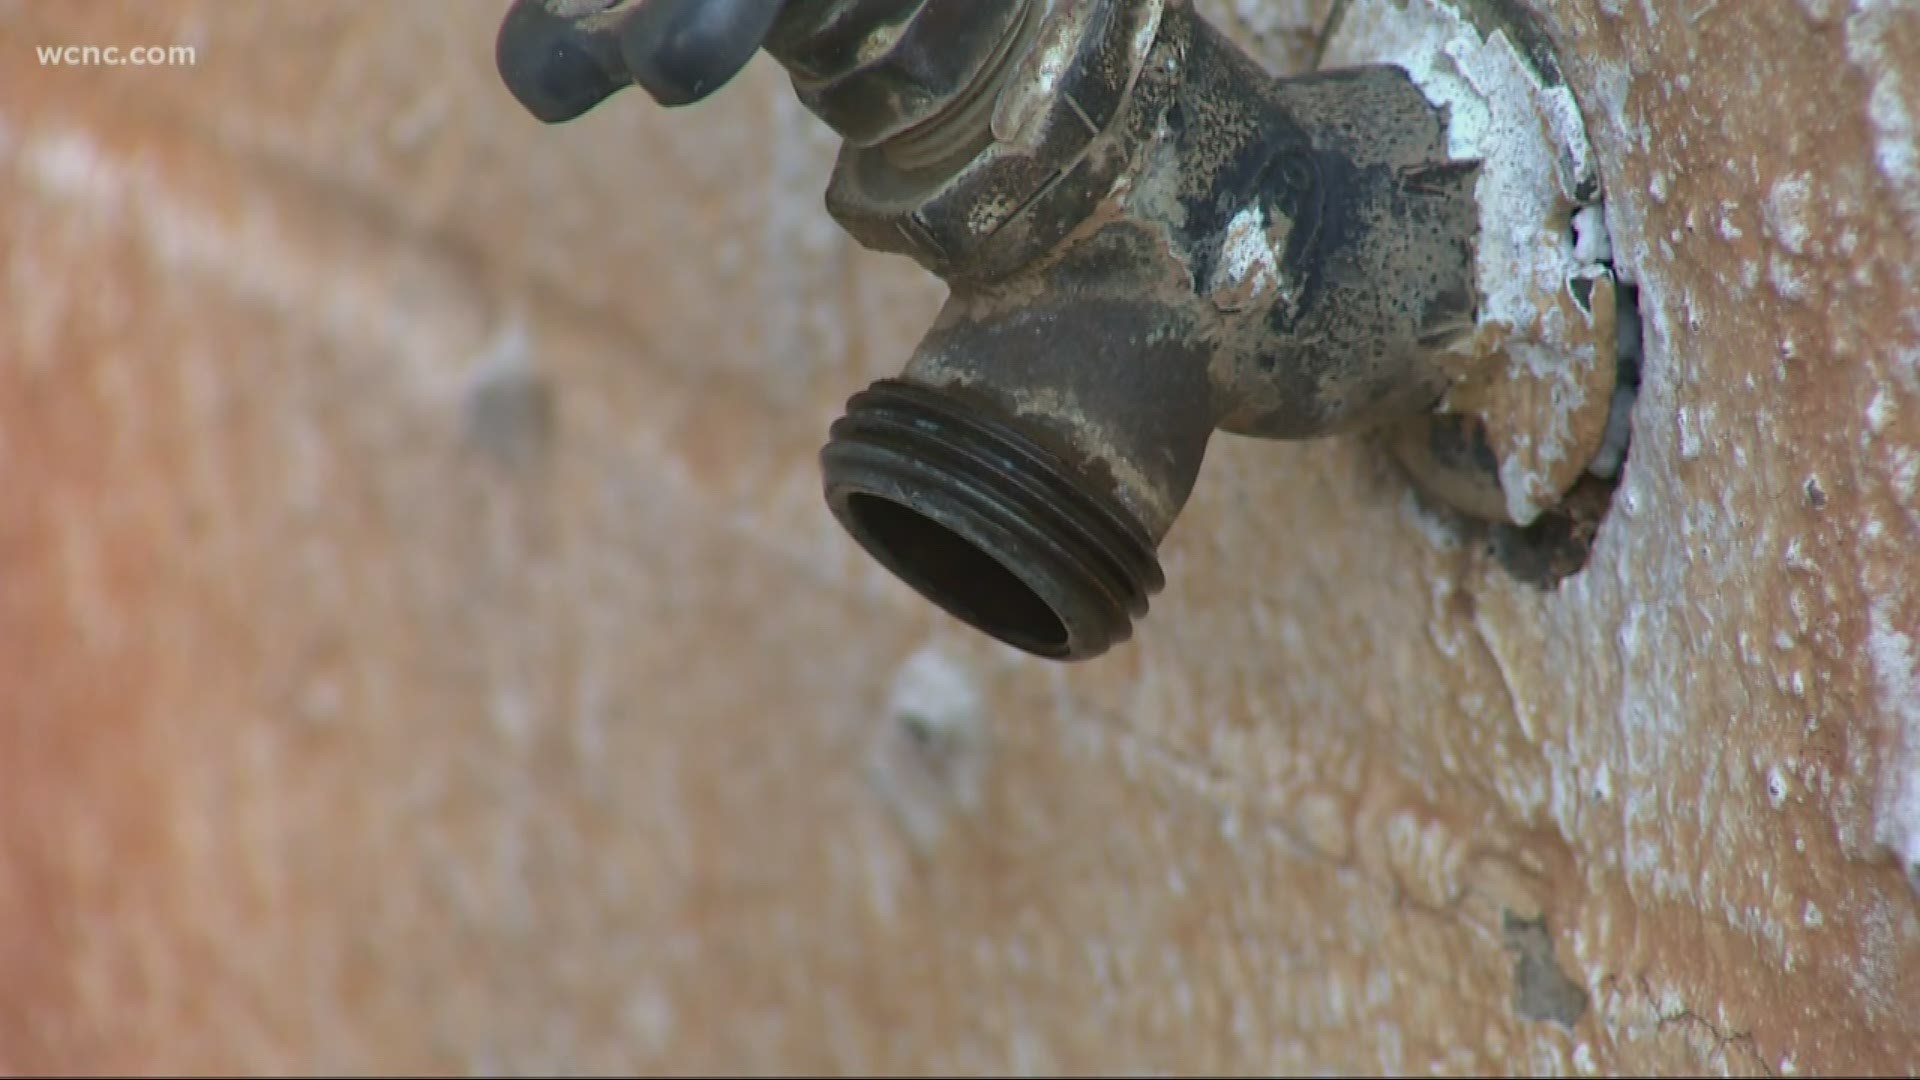 Benjamin Franklin Plumbing is bracing for the freezing blast and what it can do to pipes. They're urging homeowners to disconnect outside hoses from faucets.